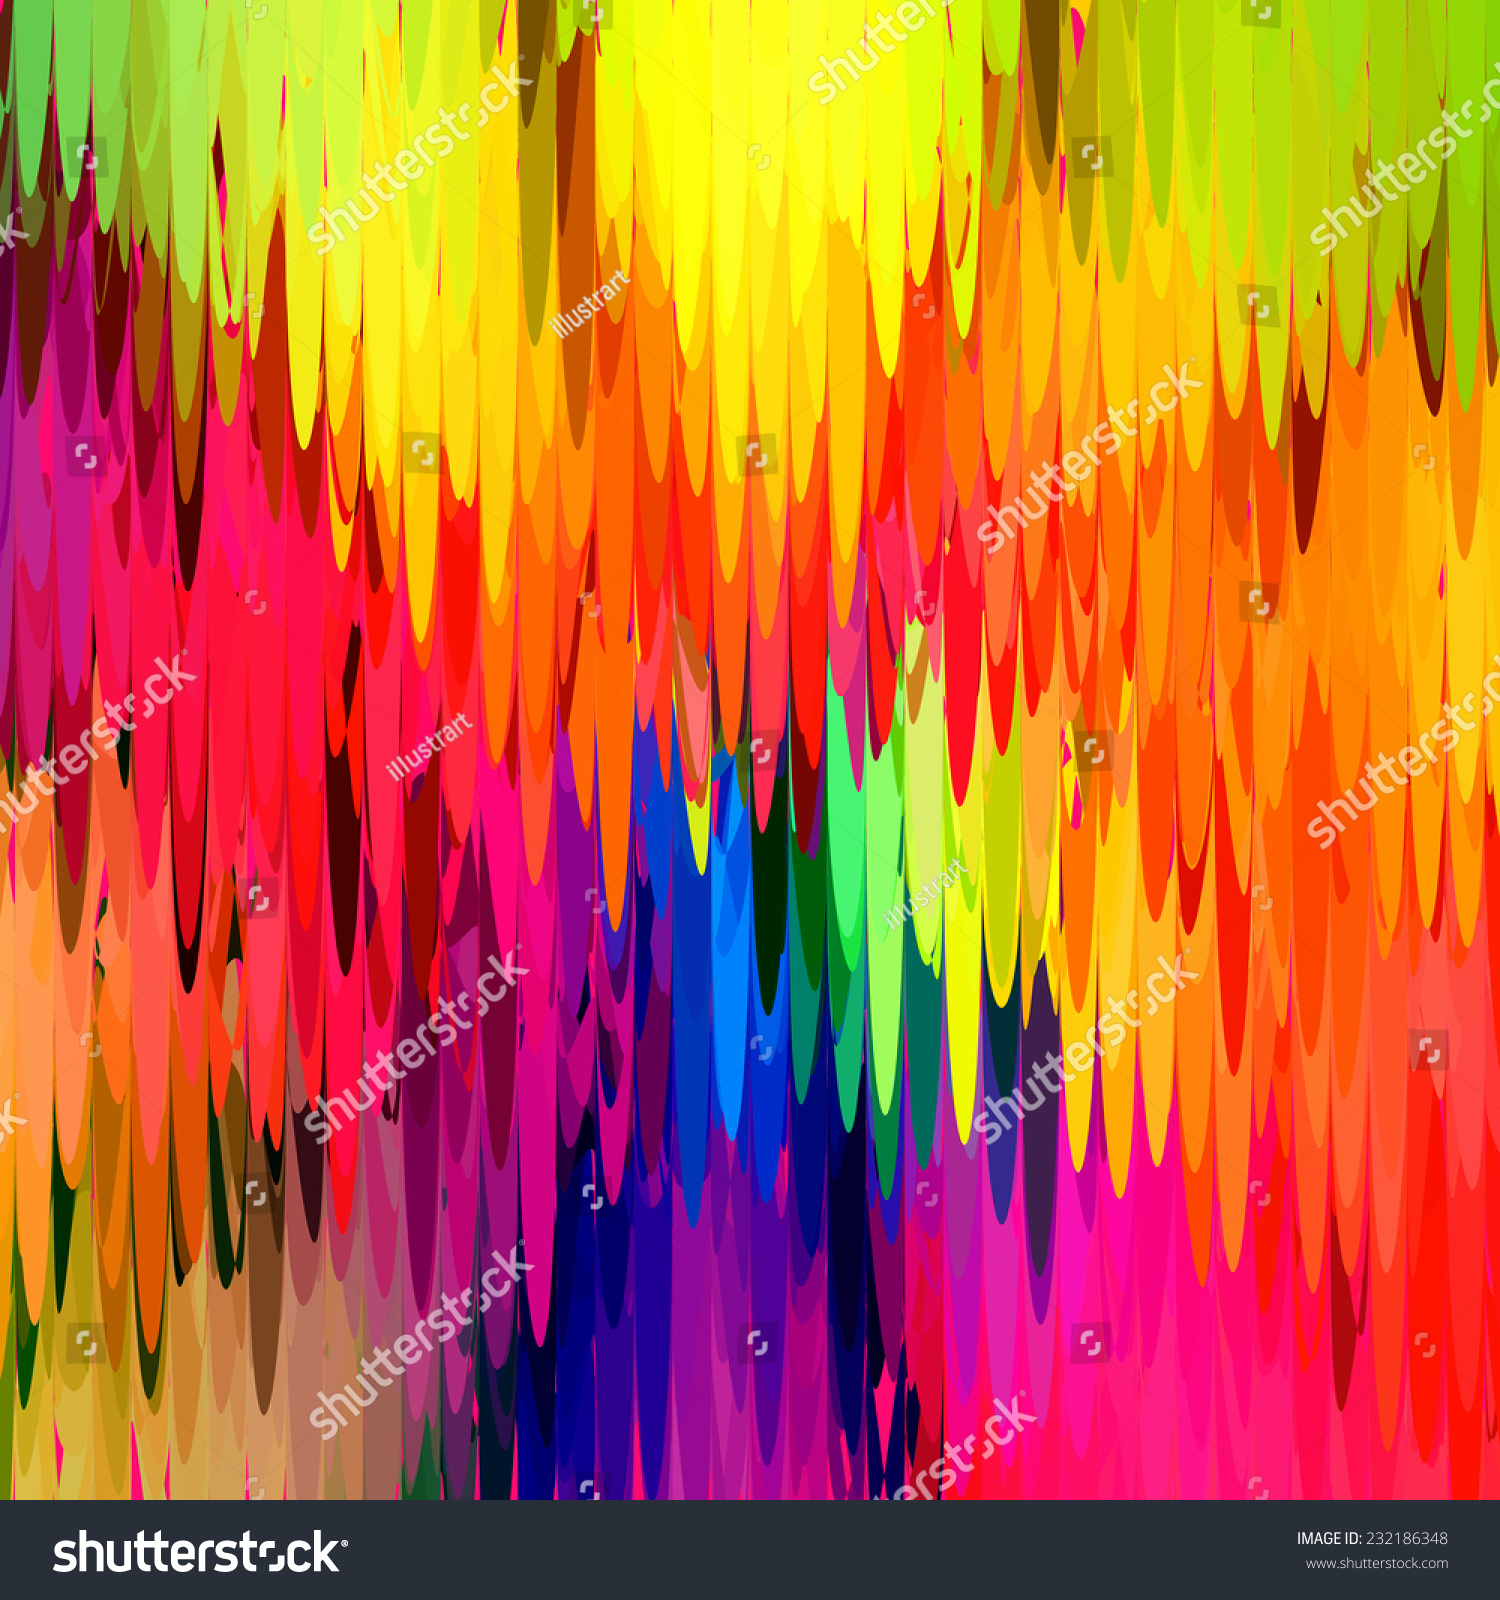 colorful abstract background  #232186348